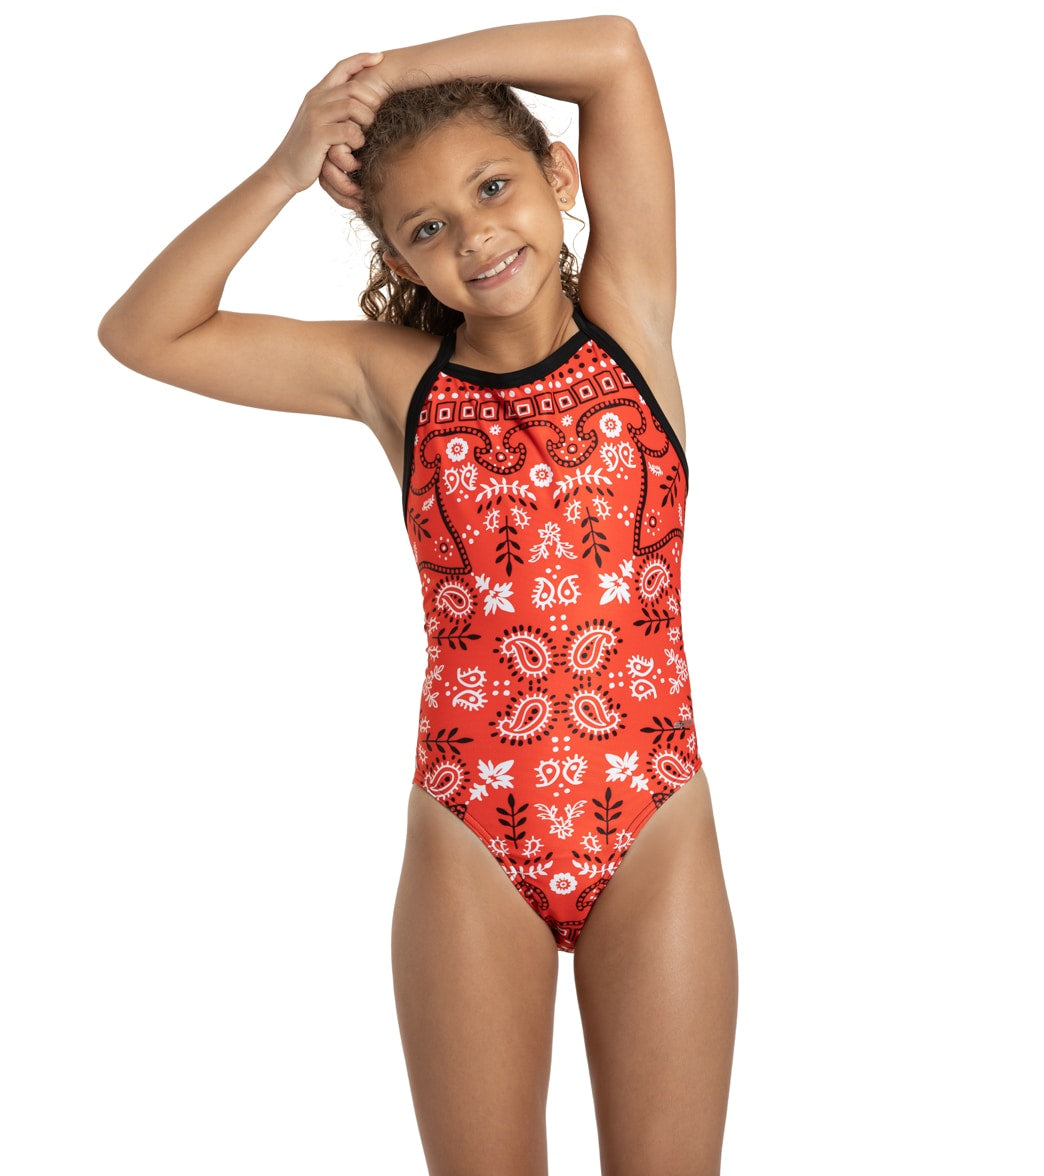 Junior Guard 1-Piece THIN Strap Swimsuit Navy (READ SIZING)